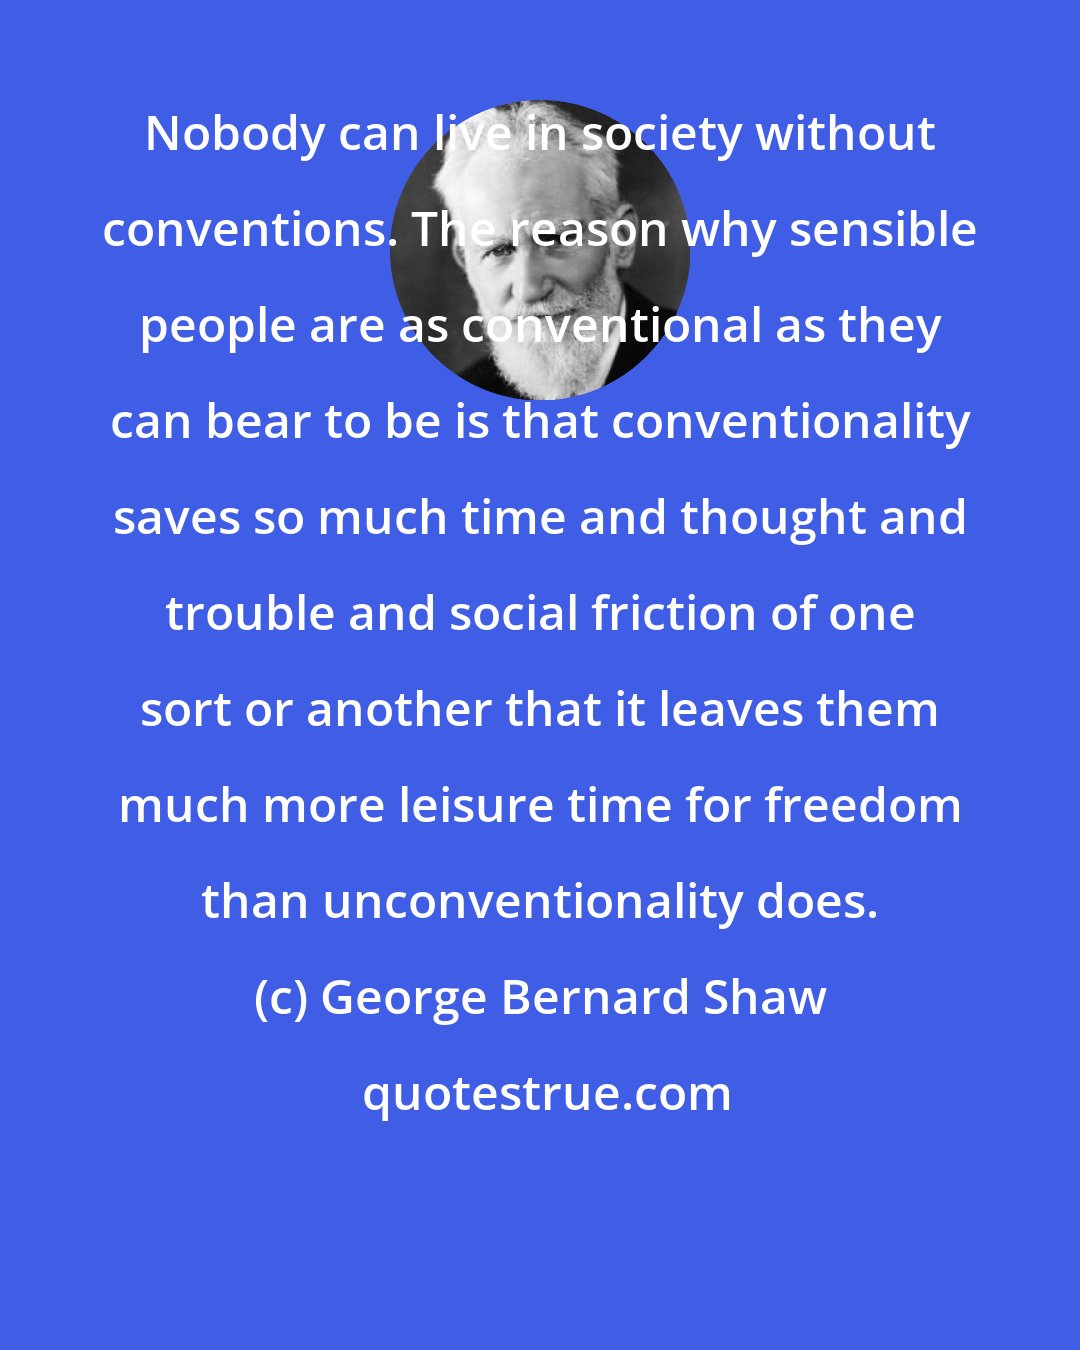 George Bernard Shaw: Nobody can live in society without conventions. The reason why sensible people are as conventional as they can bear to be is that conventionality saves so much time and thought and trouble and social friction of one sort or another that it leaves them much more leisure time for freedom than unconventionality does.